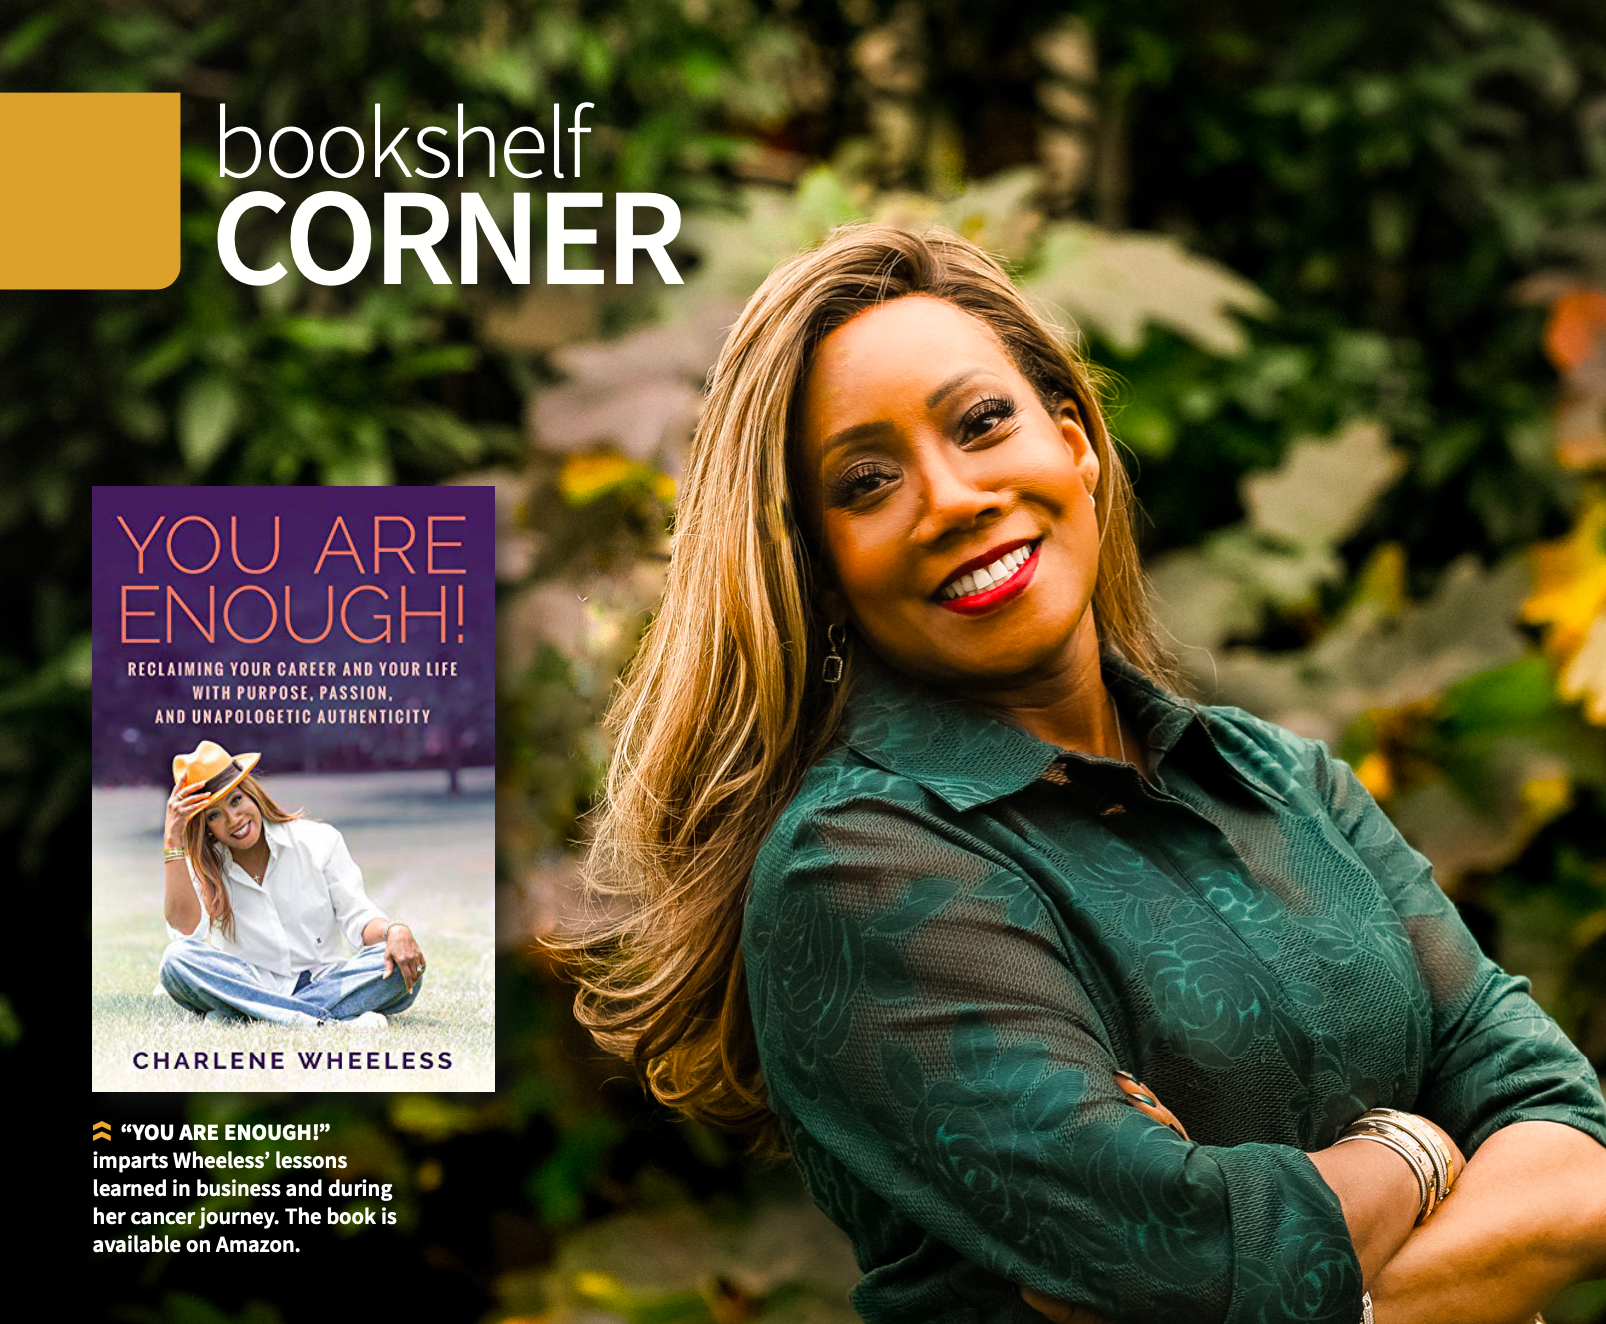 “YOU ARE ENOUGH!” imparts Wheeless’ lessons learned in business and during her cancer journey. The book is available on Amazon.